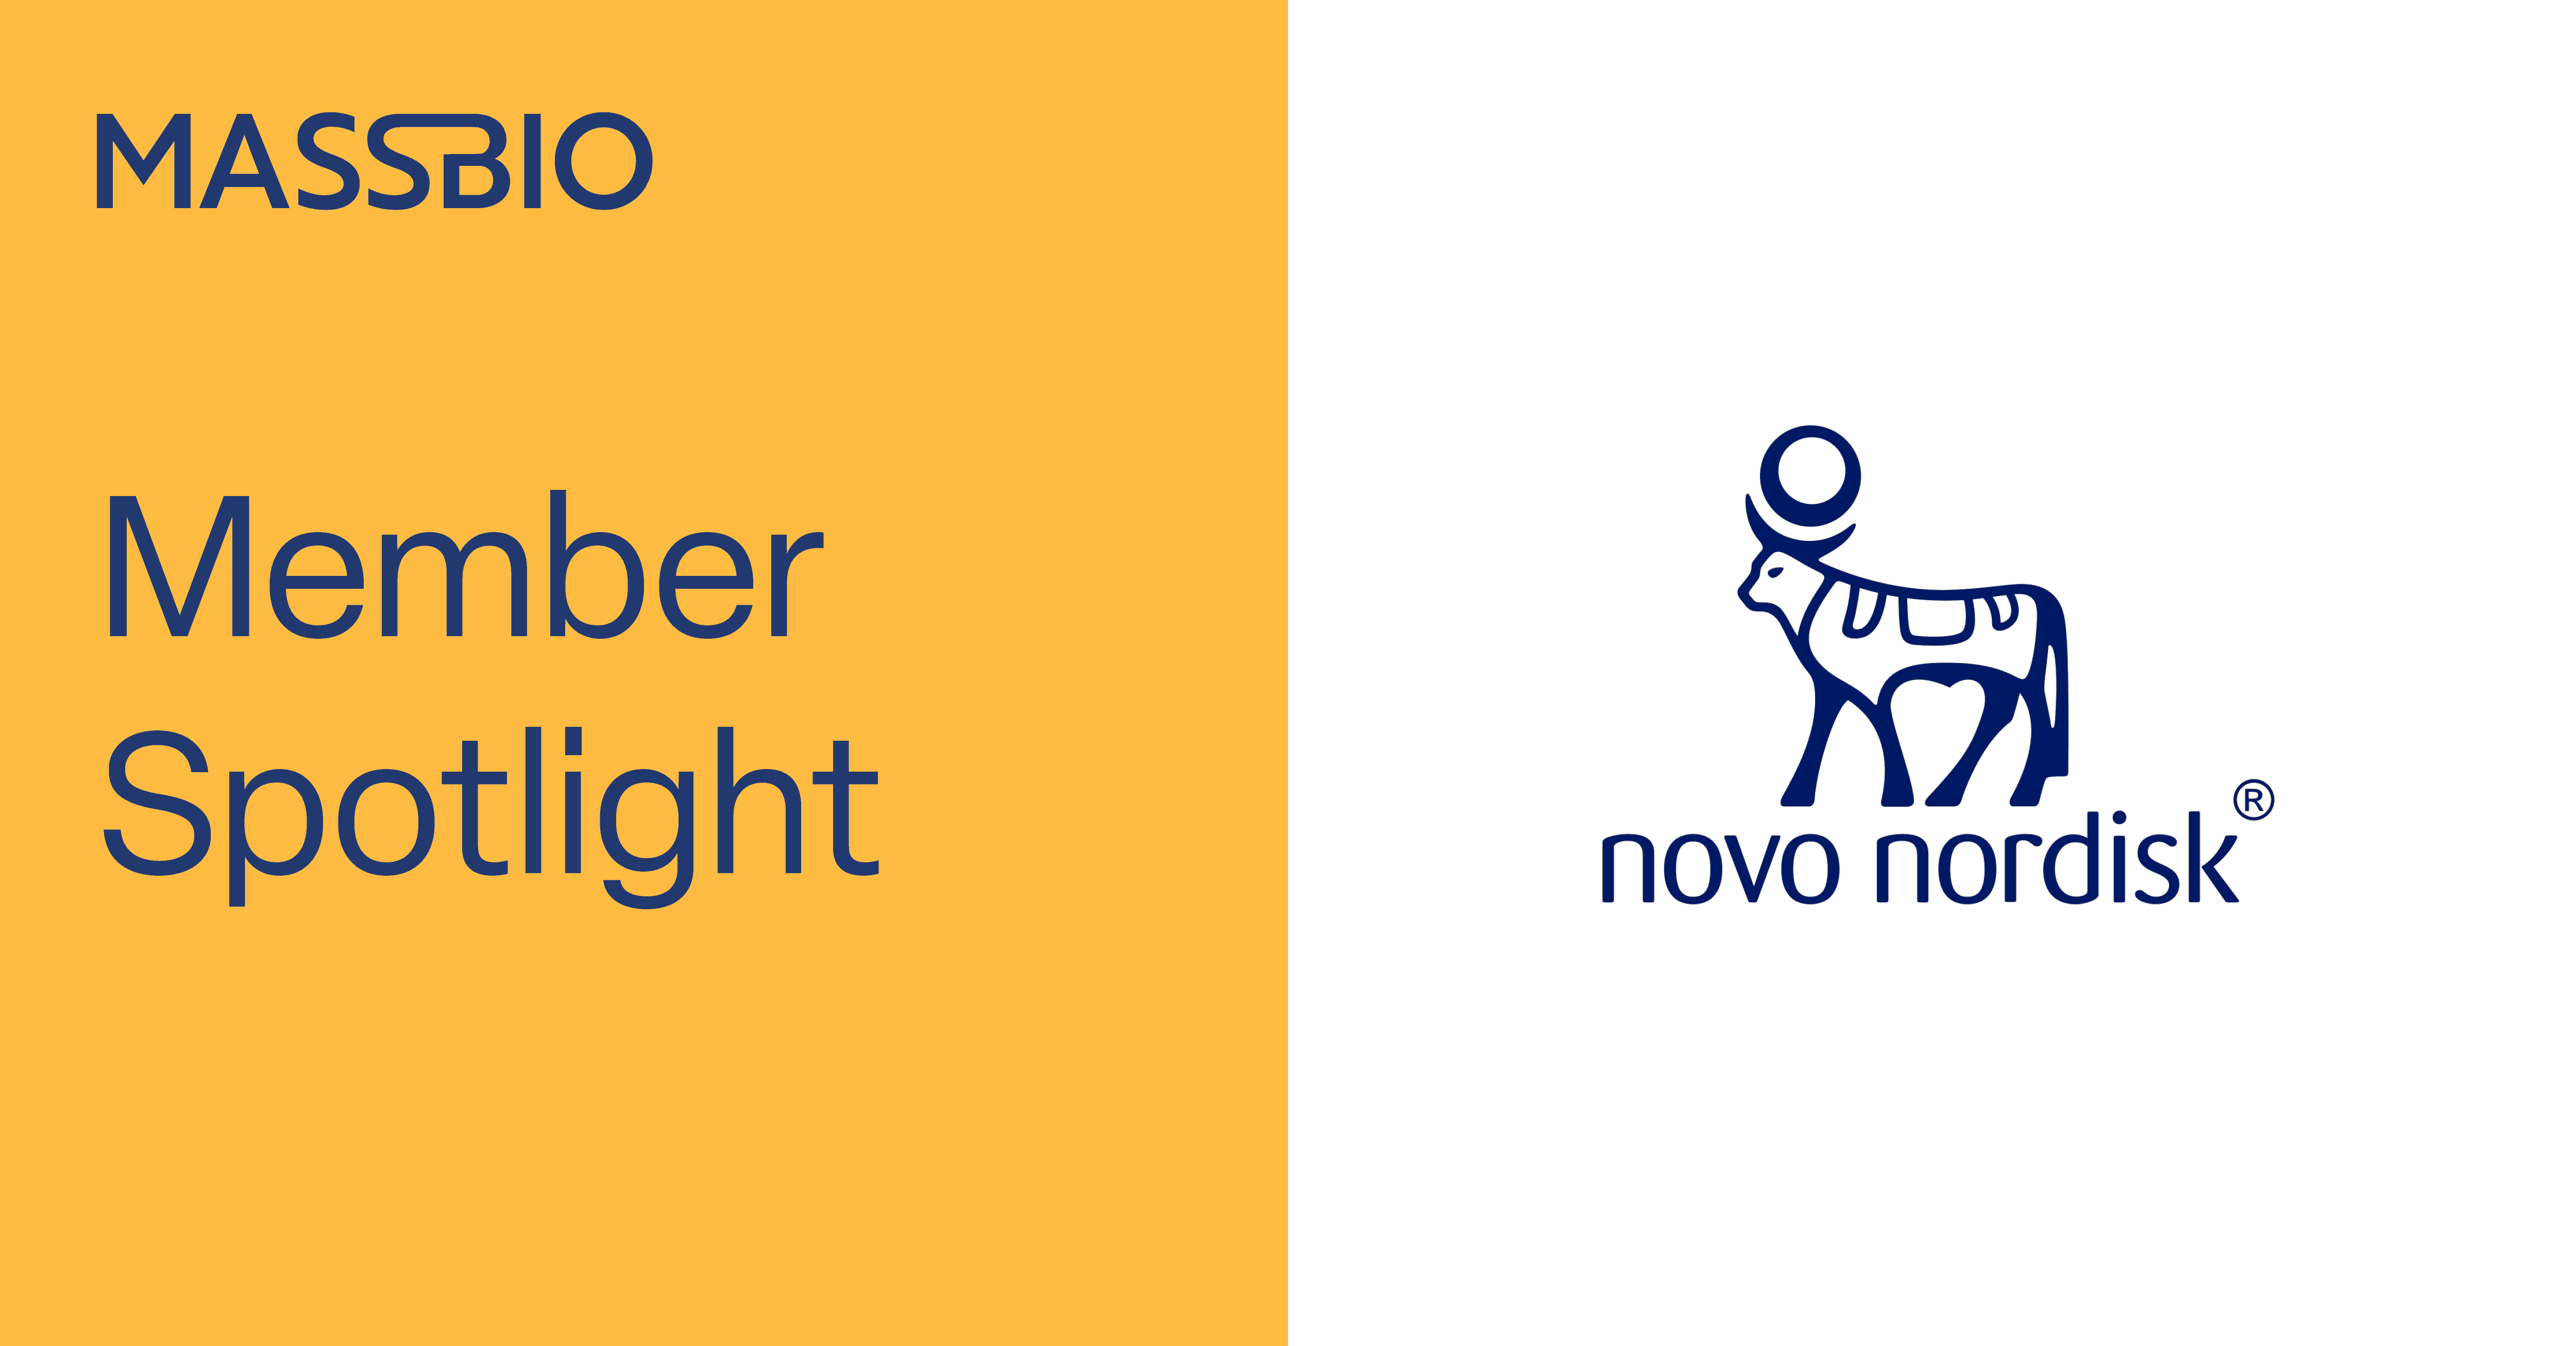 A graphic featuring the MassBio logo and the words Member Spotlight on a yellow background, and the Novo Nordisk logo on a white background.